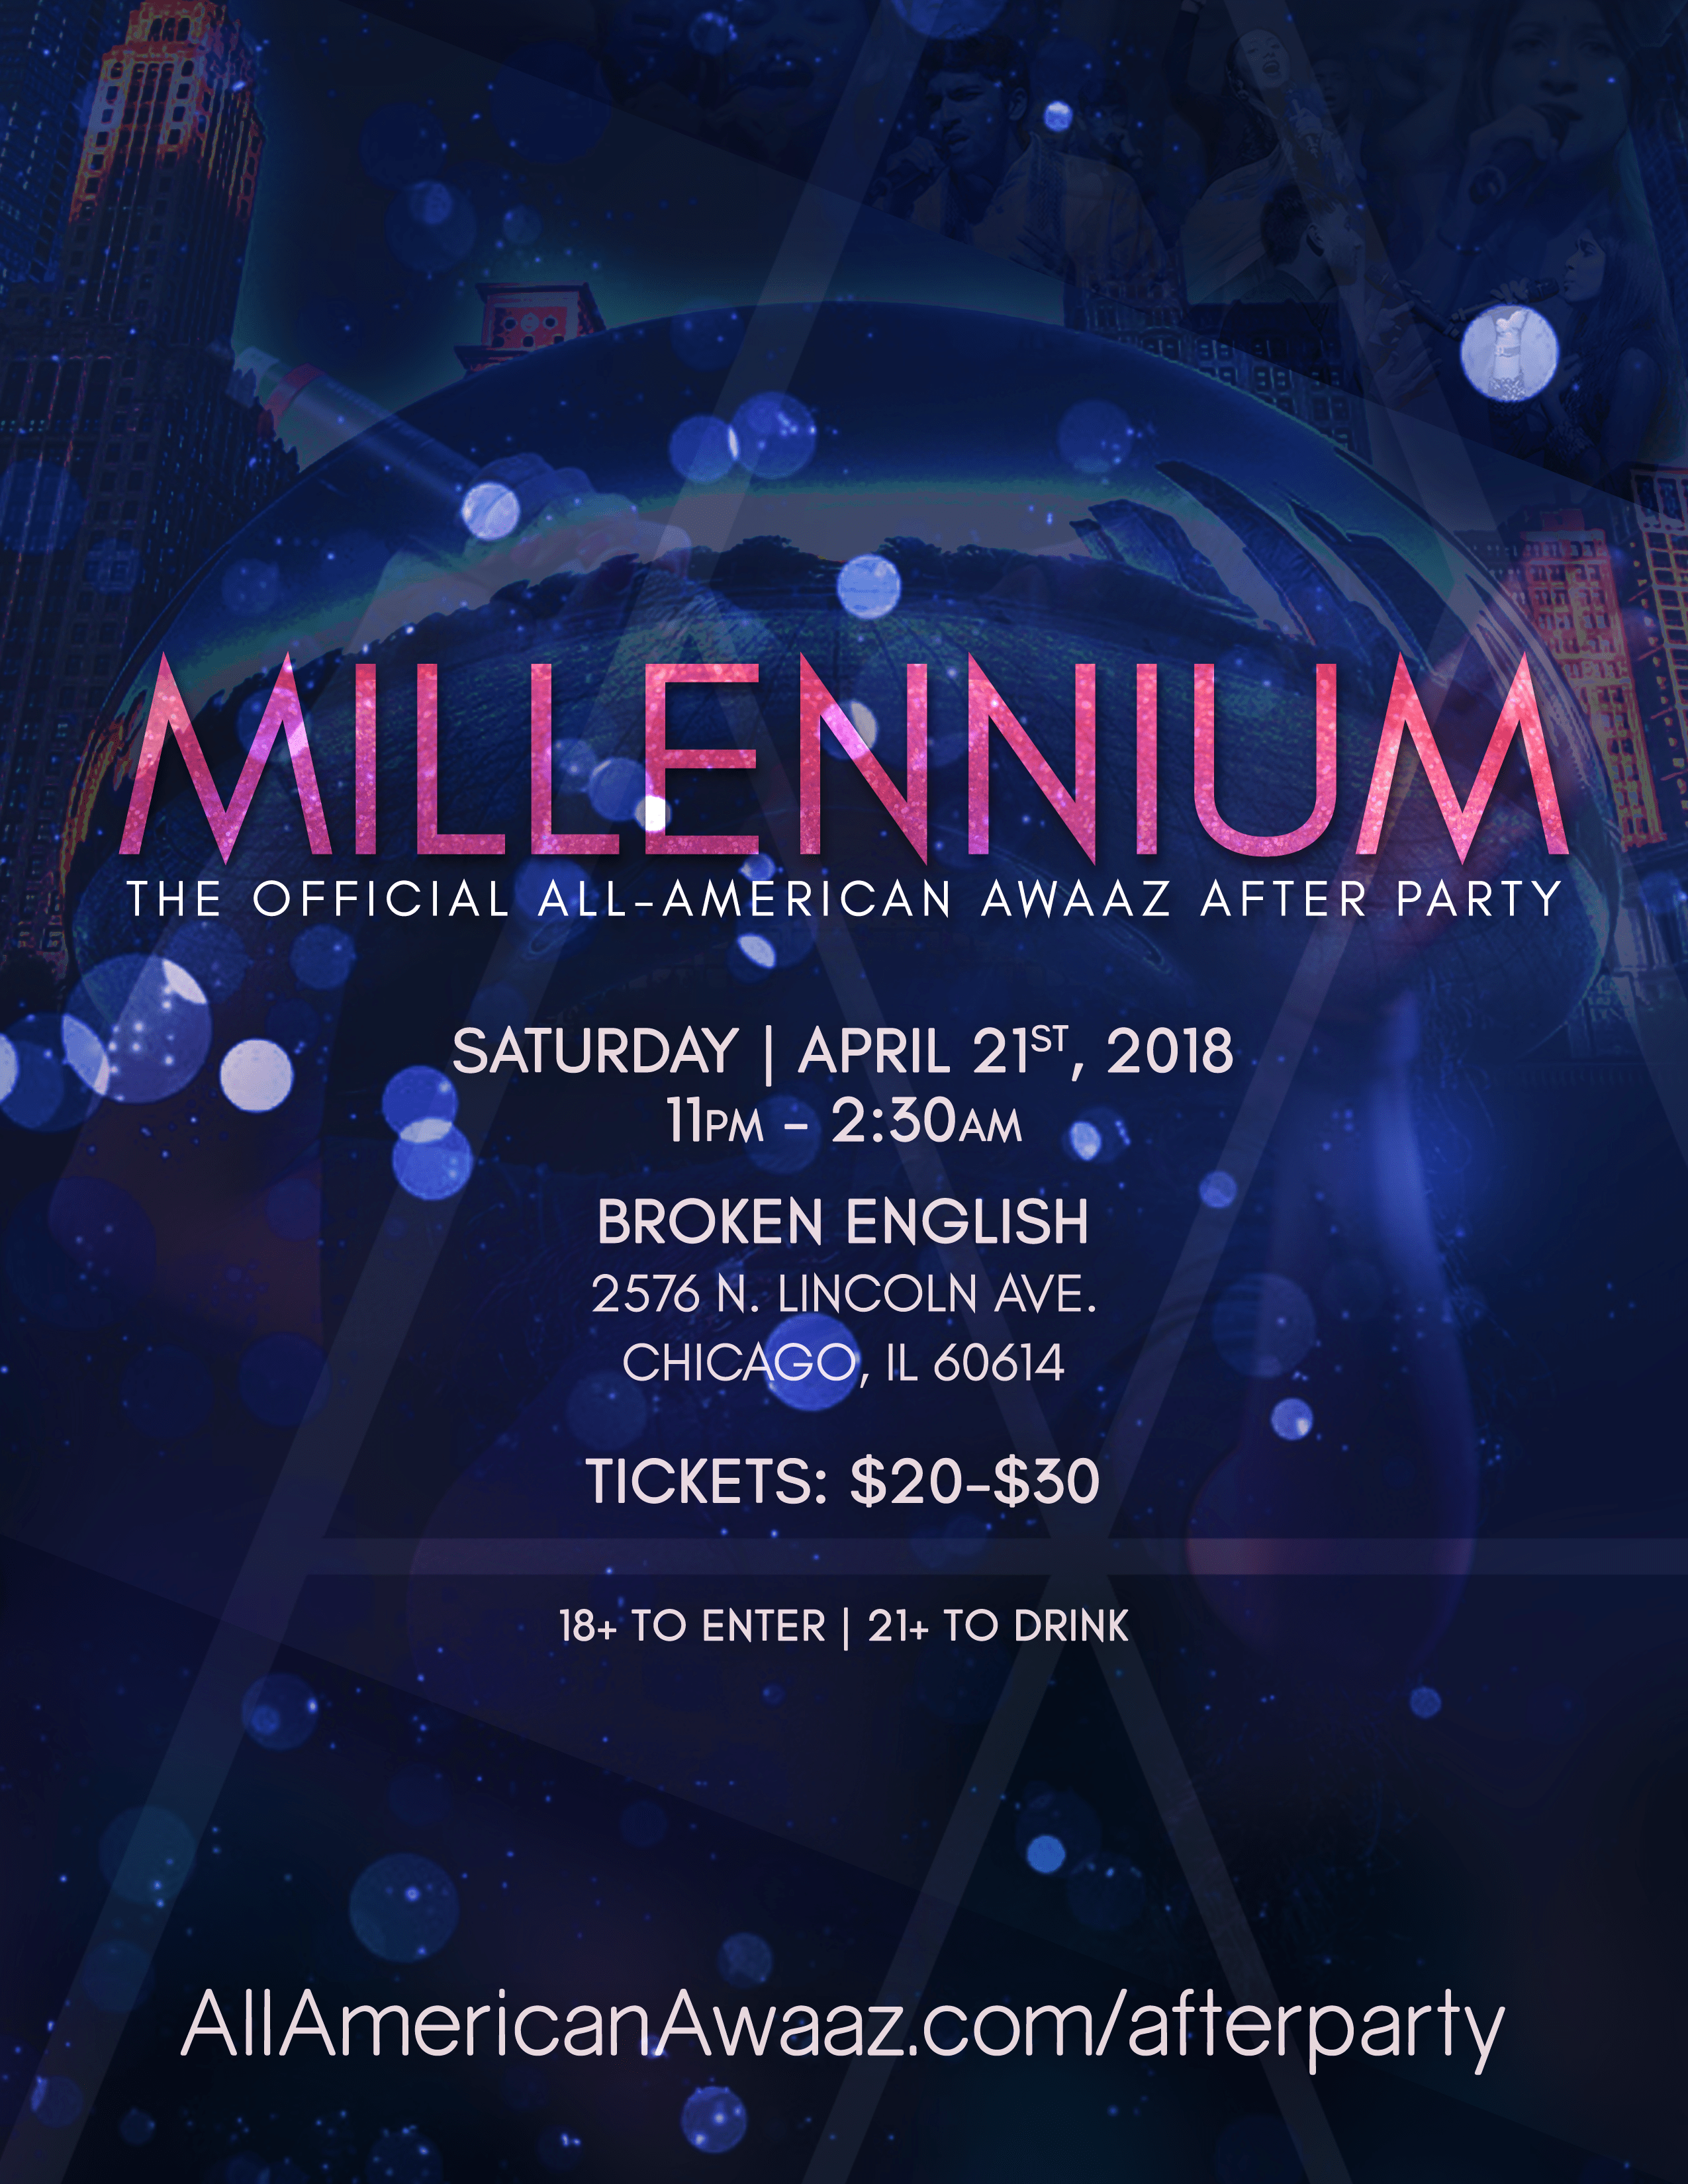 MILLENNIUM: The Official All-American Awaaz Afterparty